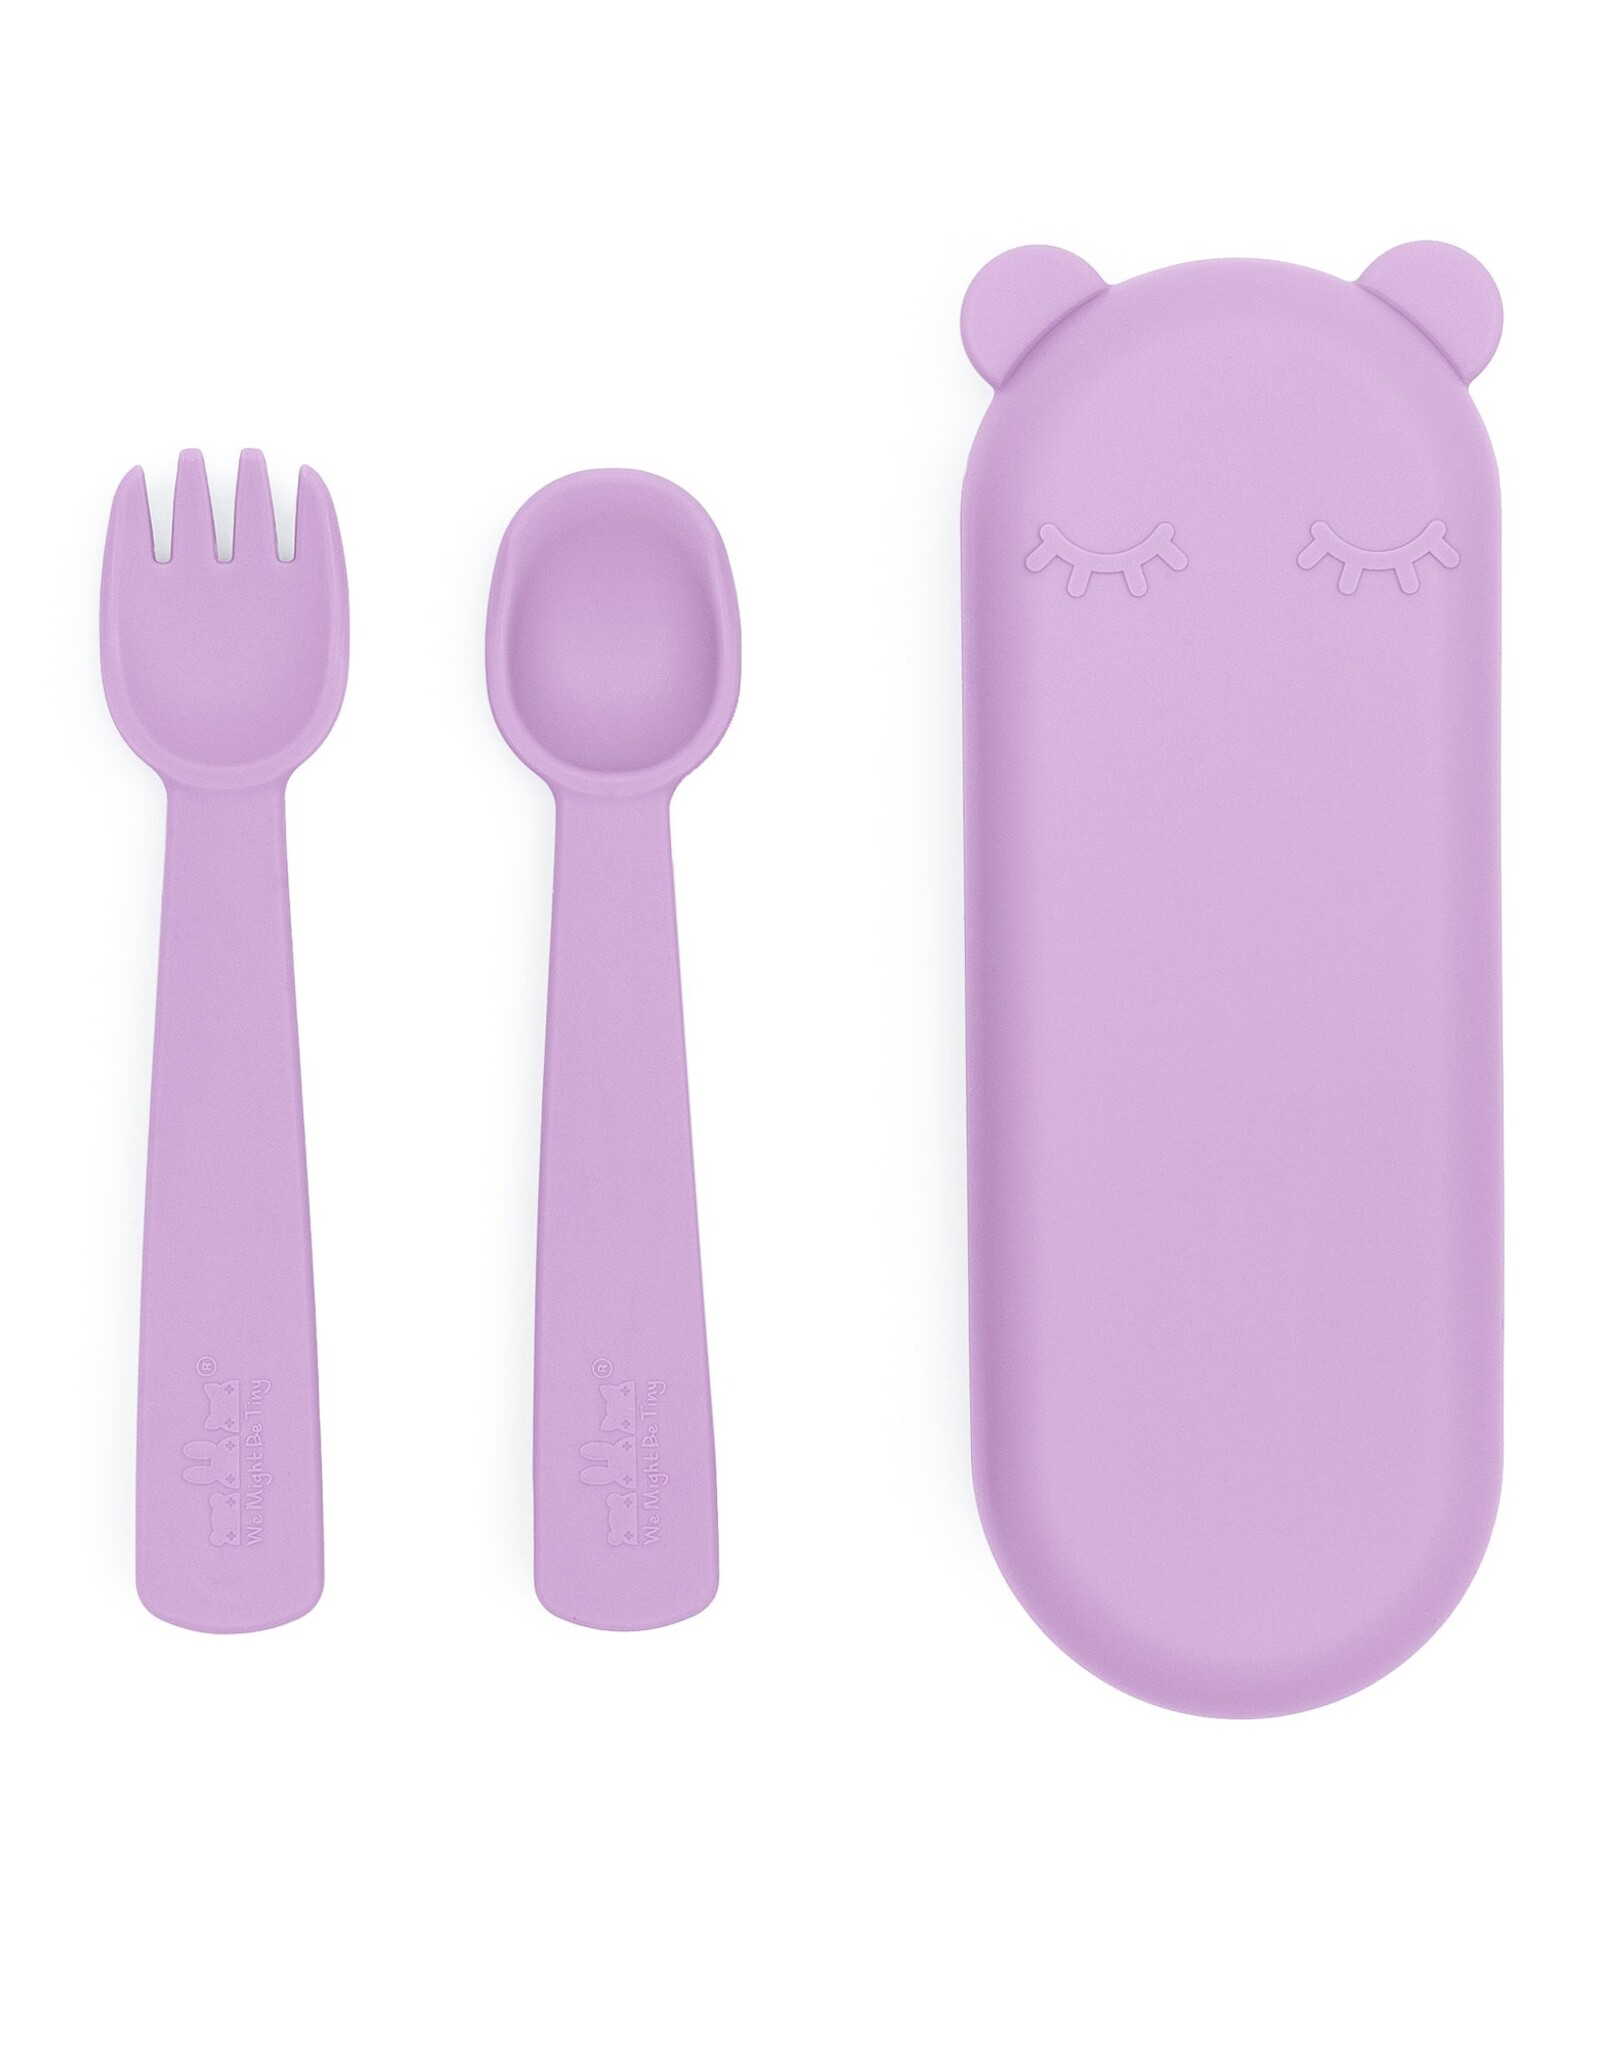 We  Might Be Tiny We Might Be Tiny - Feedie Fork & Spoon Set Lilac